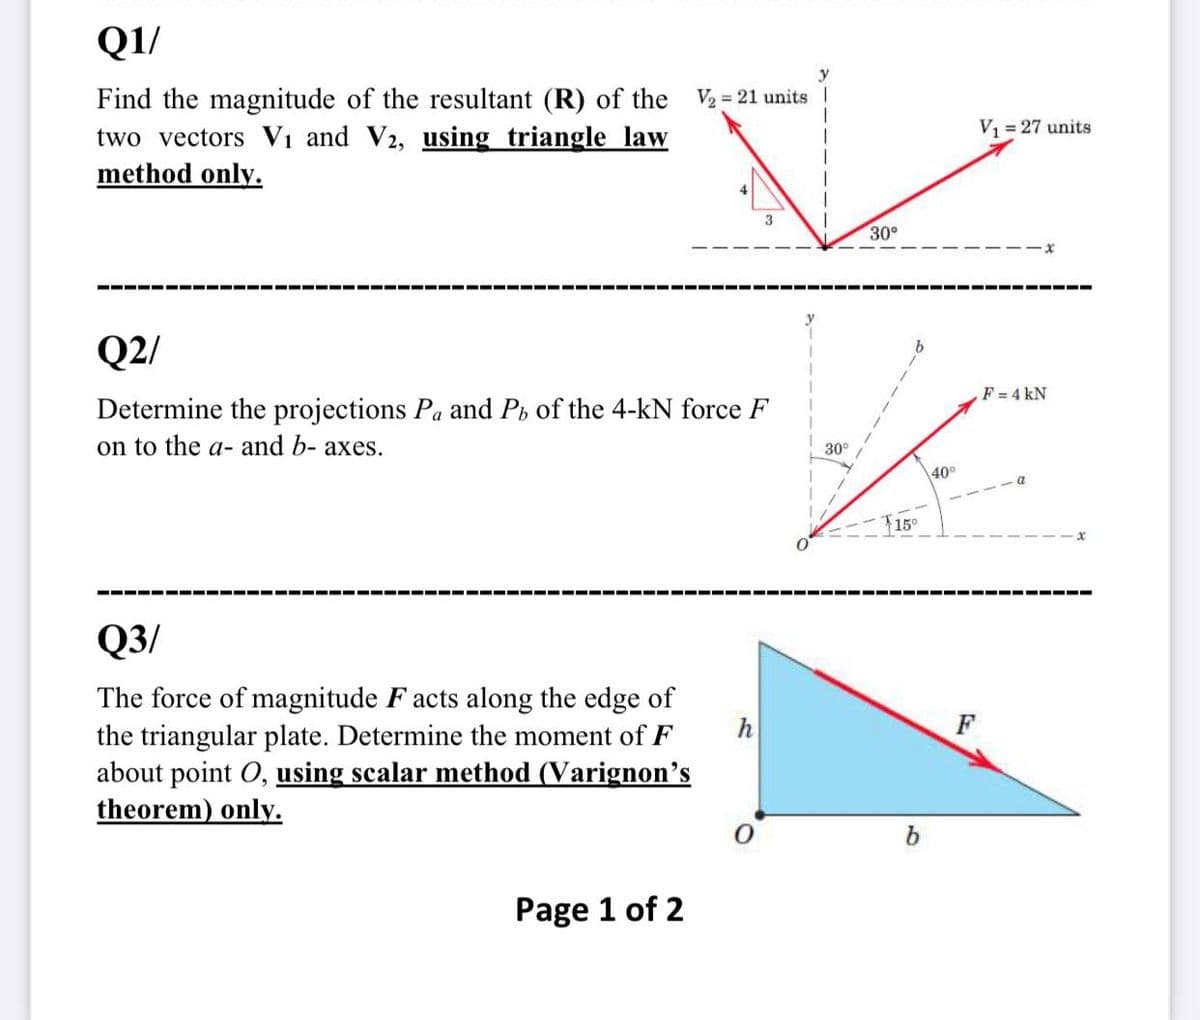 QI/
Find the magnitude of the resultant (R) of the
two vectors Vi and V2, using triangle law
method only.
V2 = 21 units I
V = 27 units
3
30°
---- ---- ---- ---- --- ---- --- ---- --- ---- --- ---- --- ---- --- ---- --- --
---- --- ----
Q2/
F = 4 kN
Determine the projections Pa and Pi of the 4-kN force F
on to the a- and b- axes.
30°
40°
T15°
---- --- ---- --- ---- --- ---- --- ---- --- ---- --- ---- --- --- ---- --- ---- ---
Q3/
The force of magnitude F acts along the edge of
the triangular plate. Determine the moment of F
about point O, using scalar method (Varignon's
theorem) only.
h
F
b
Page 1 of 2
